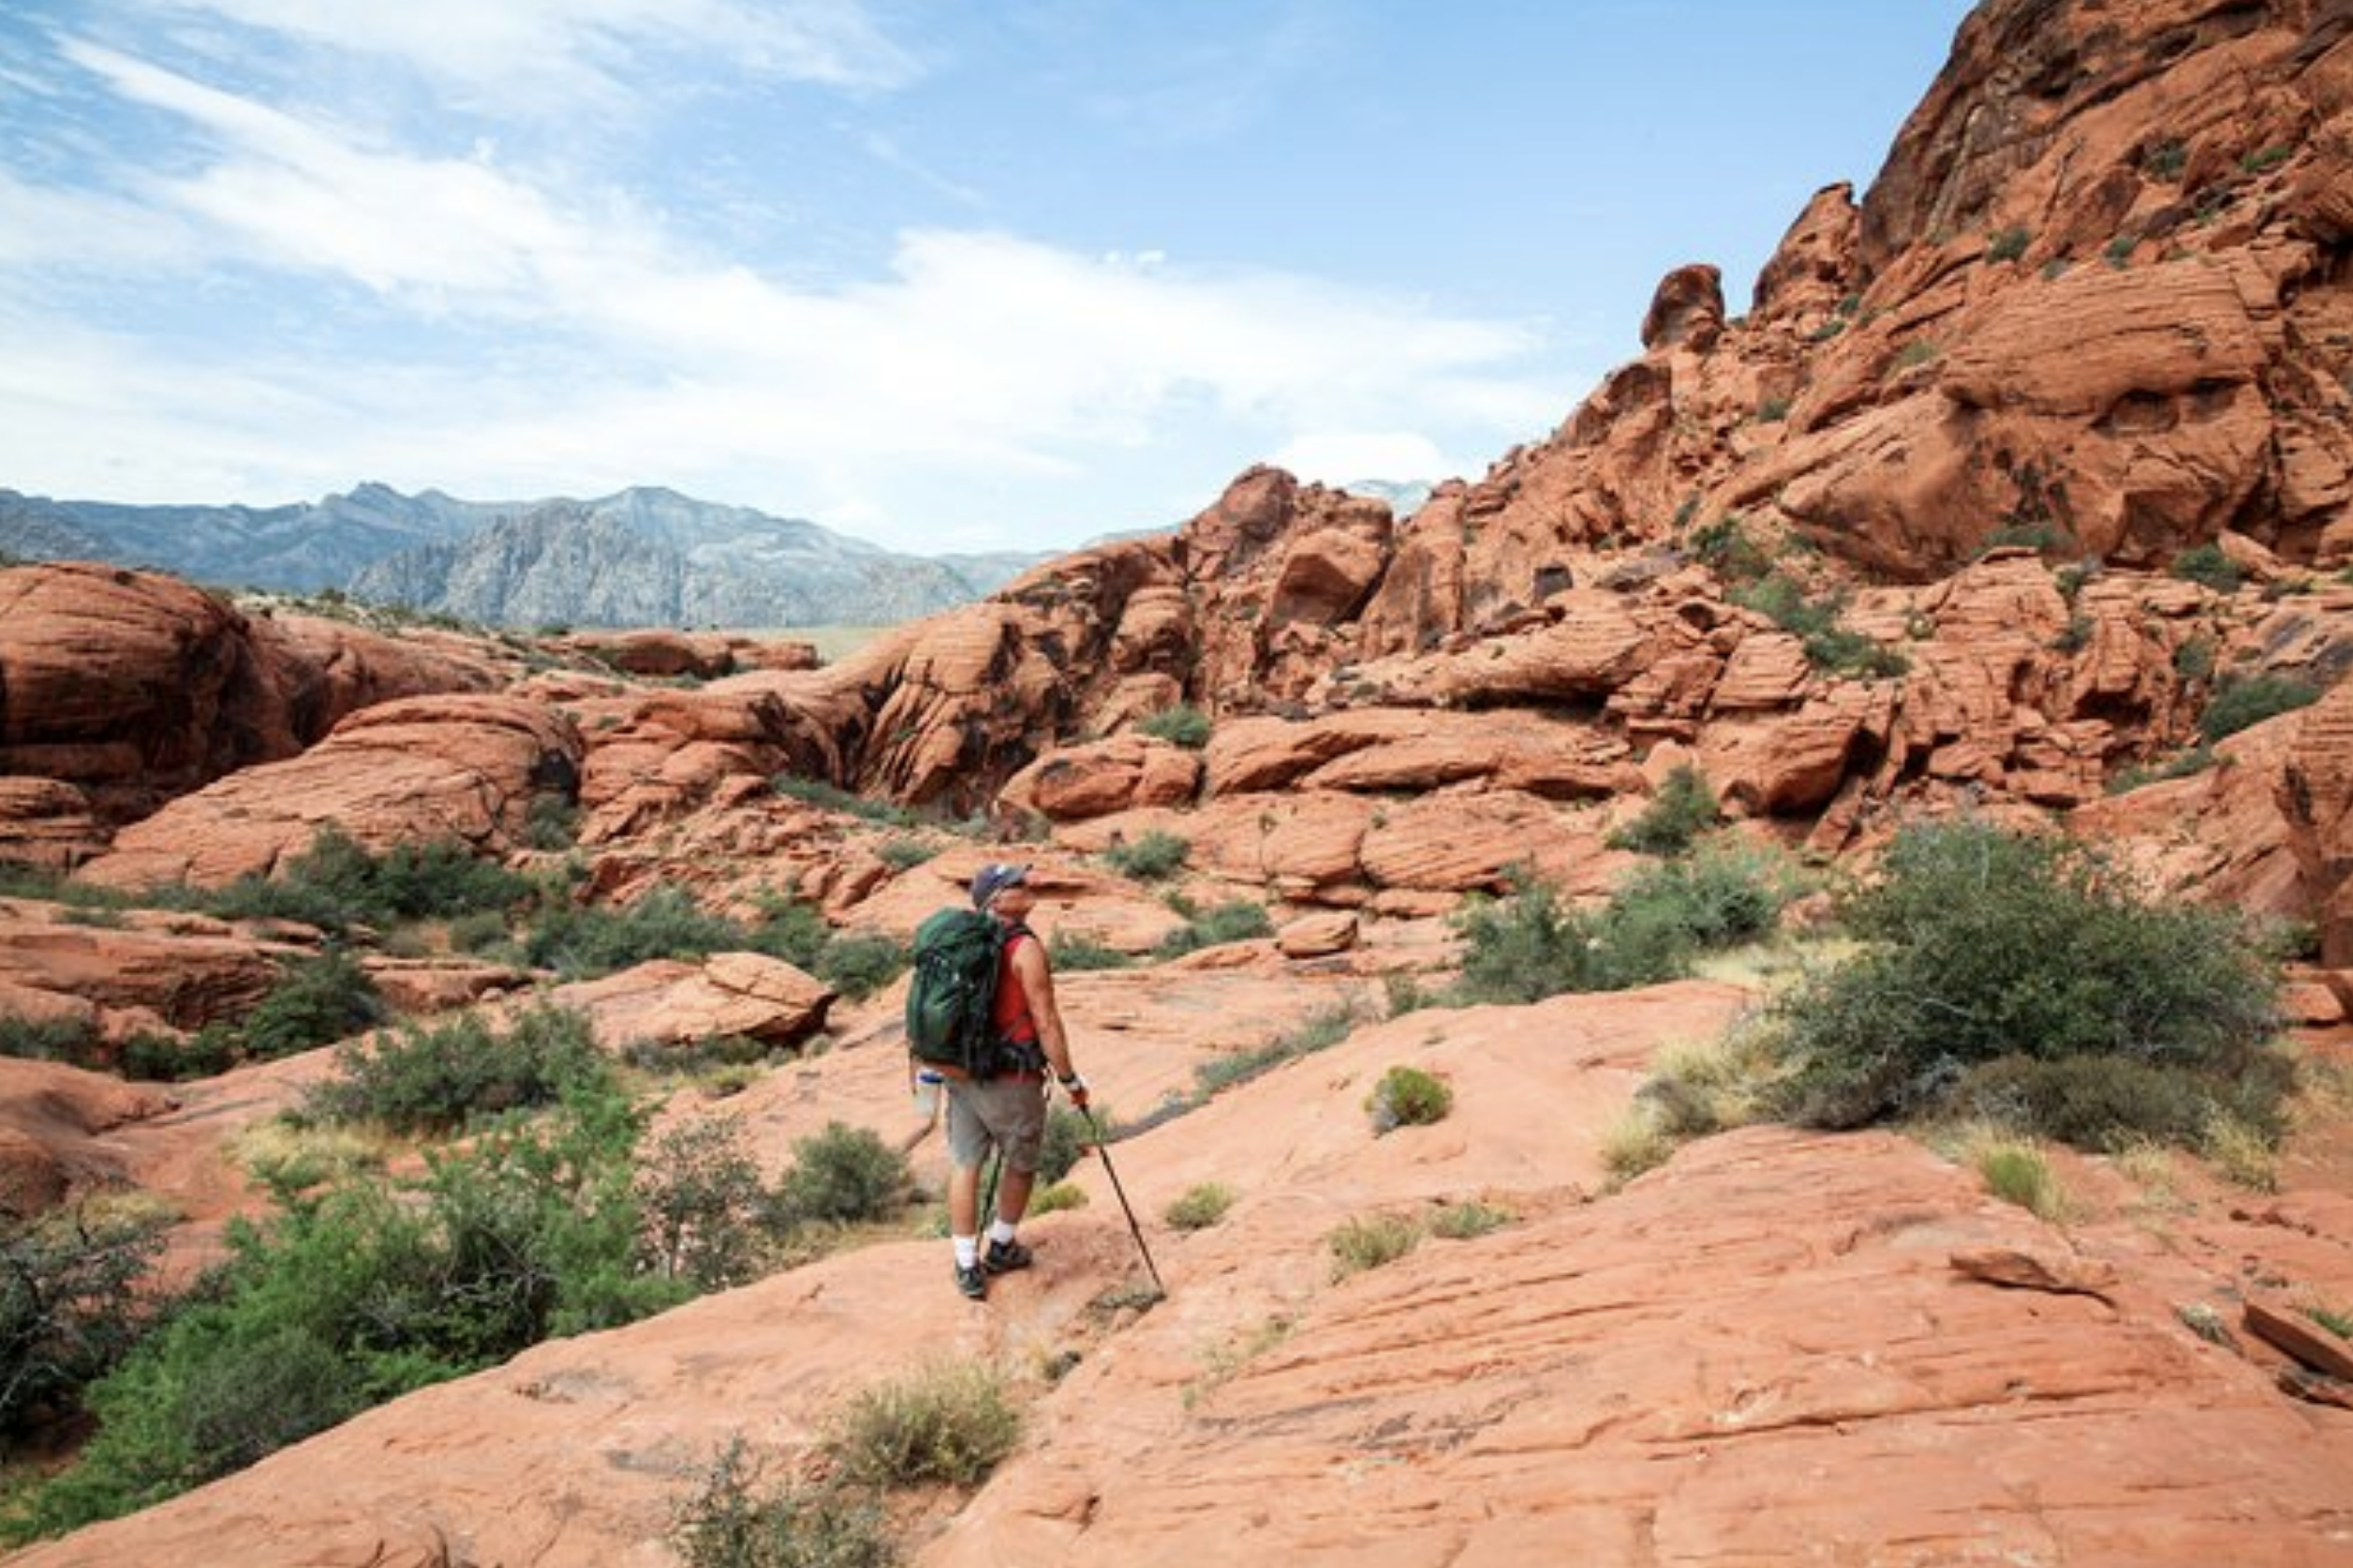 Hike in the breathtaking Red Rock Canyon